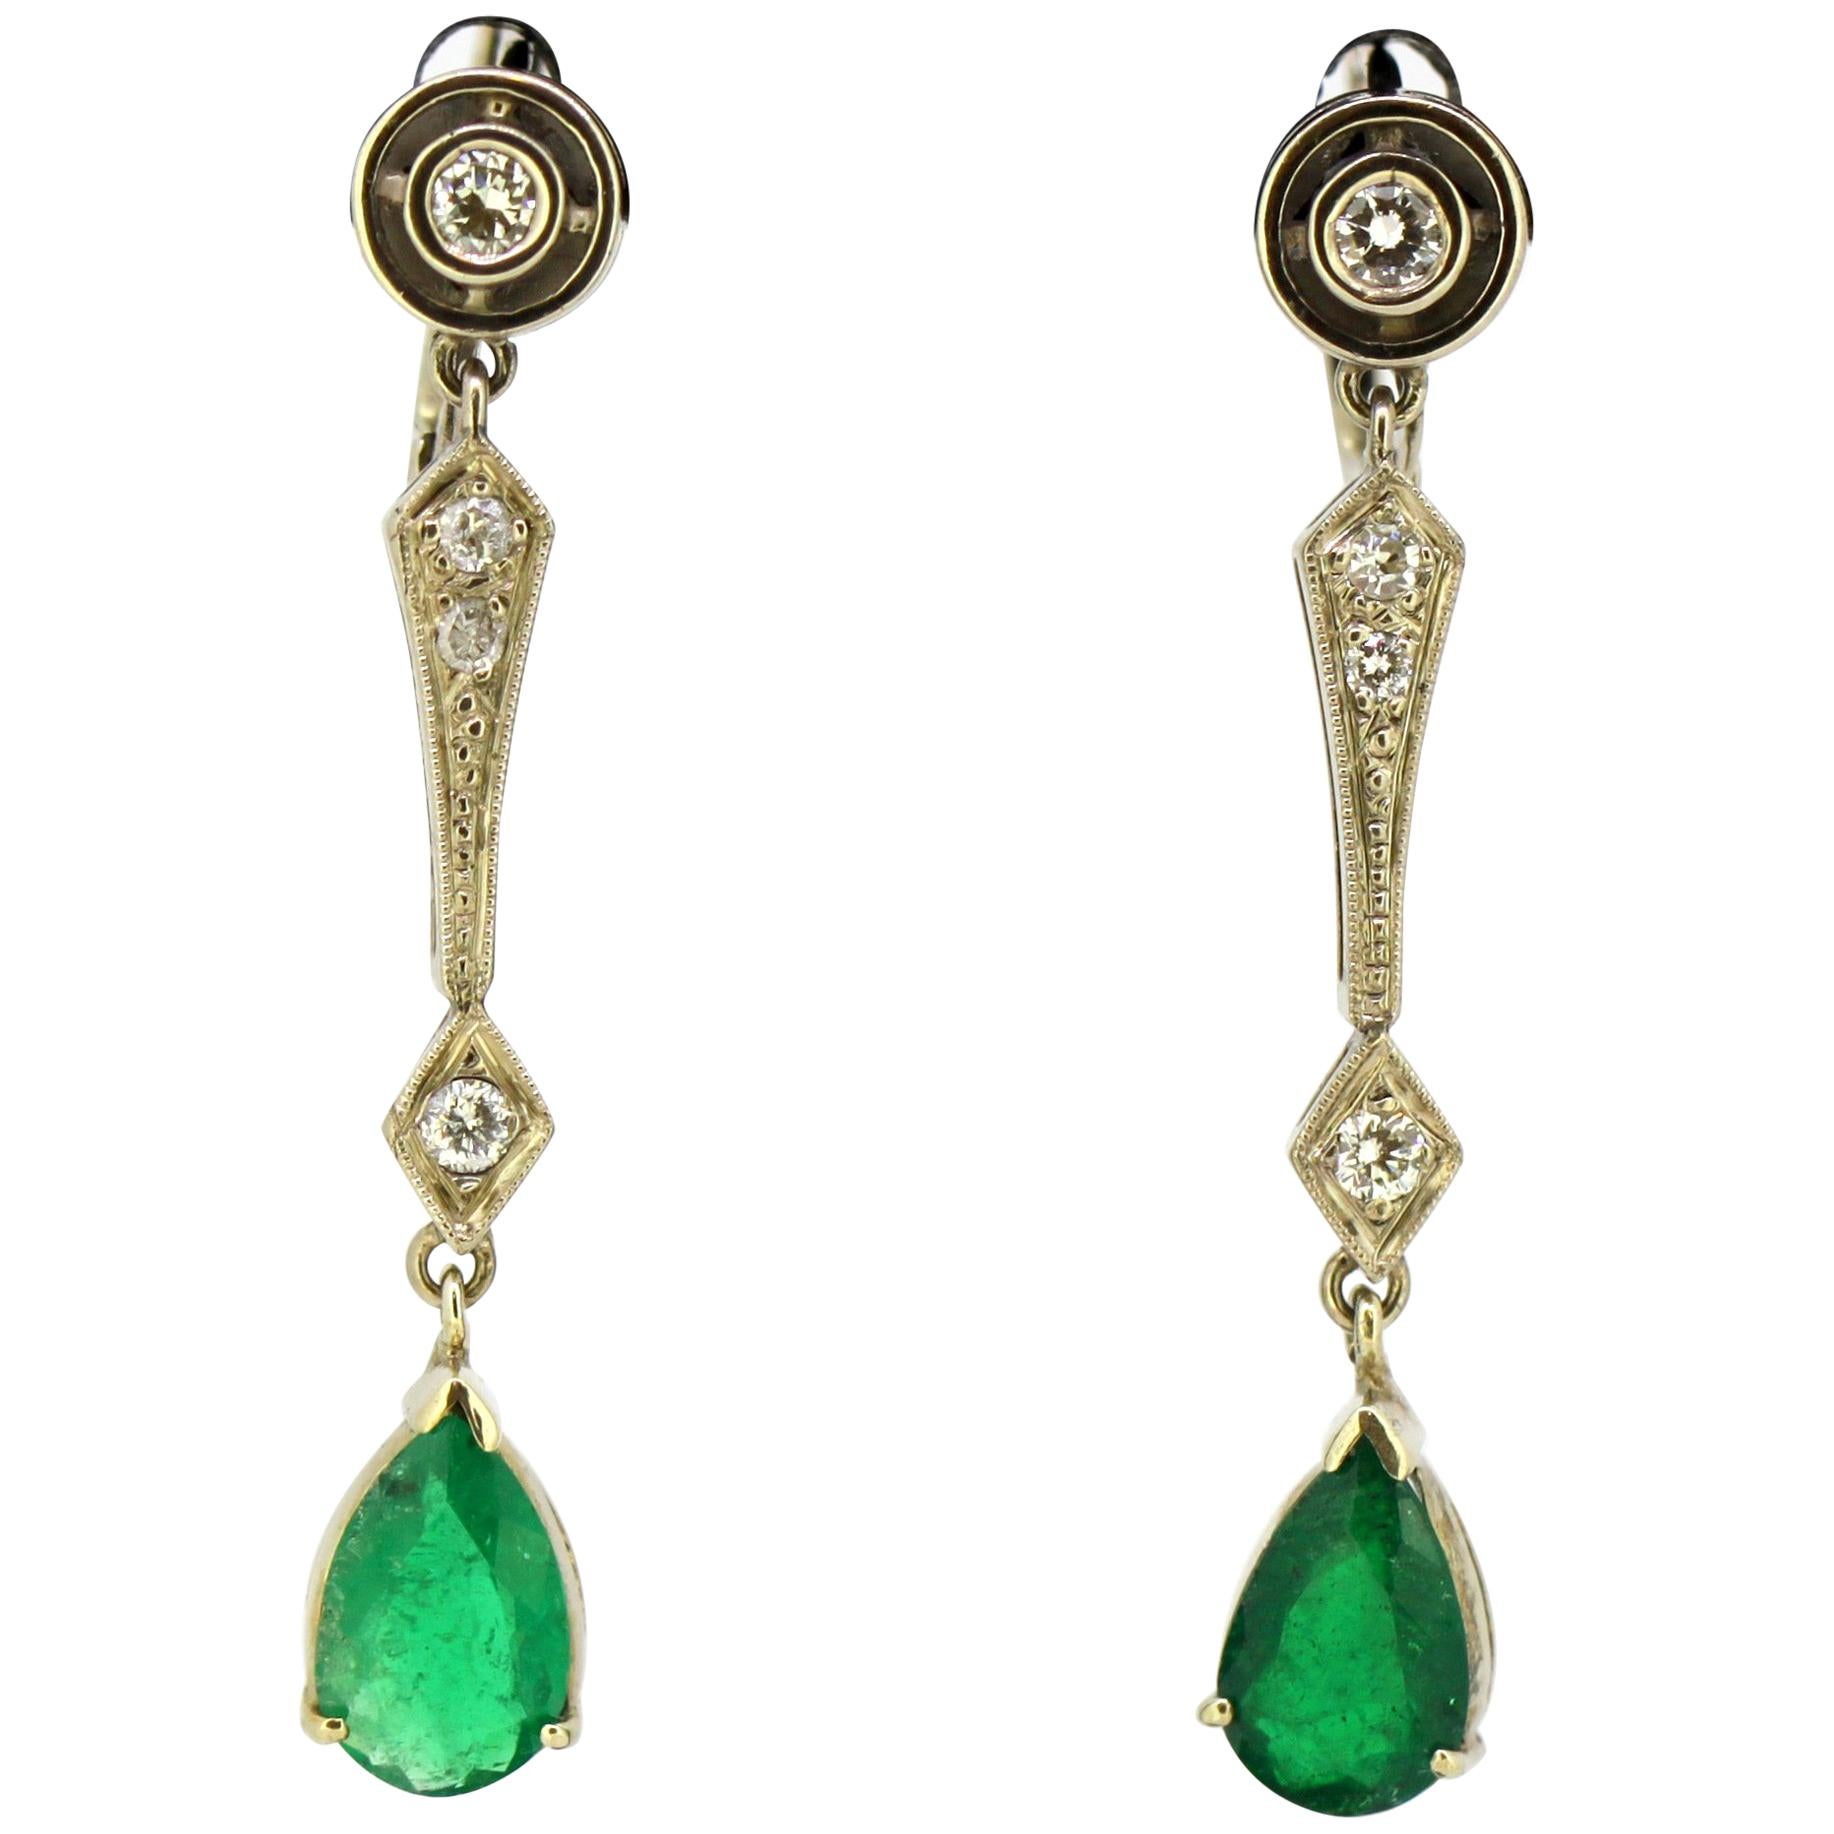 Art Deco 18 Karat Gold Ladies Stud/Clip-On Earrings with Emeralds and Diamonds